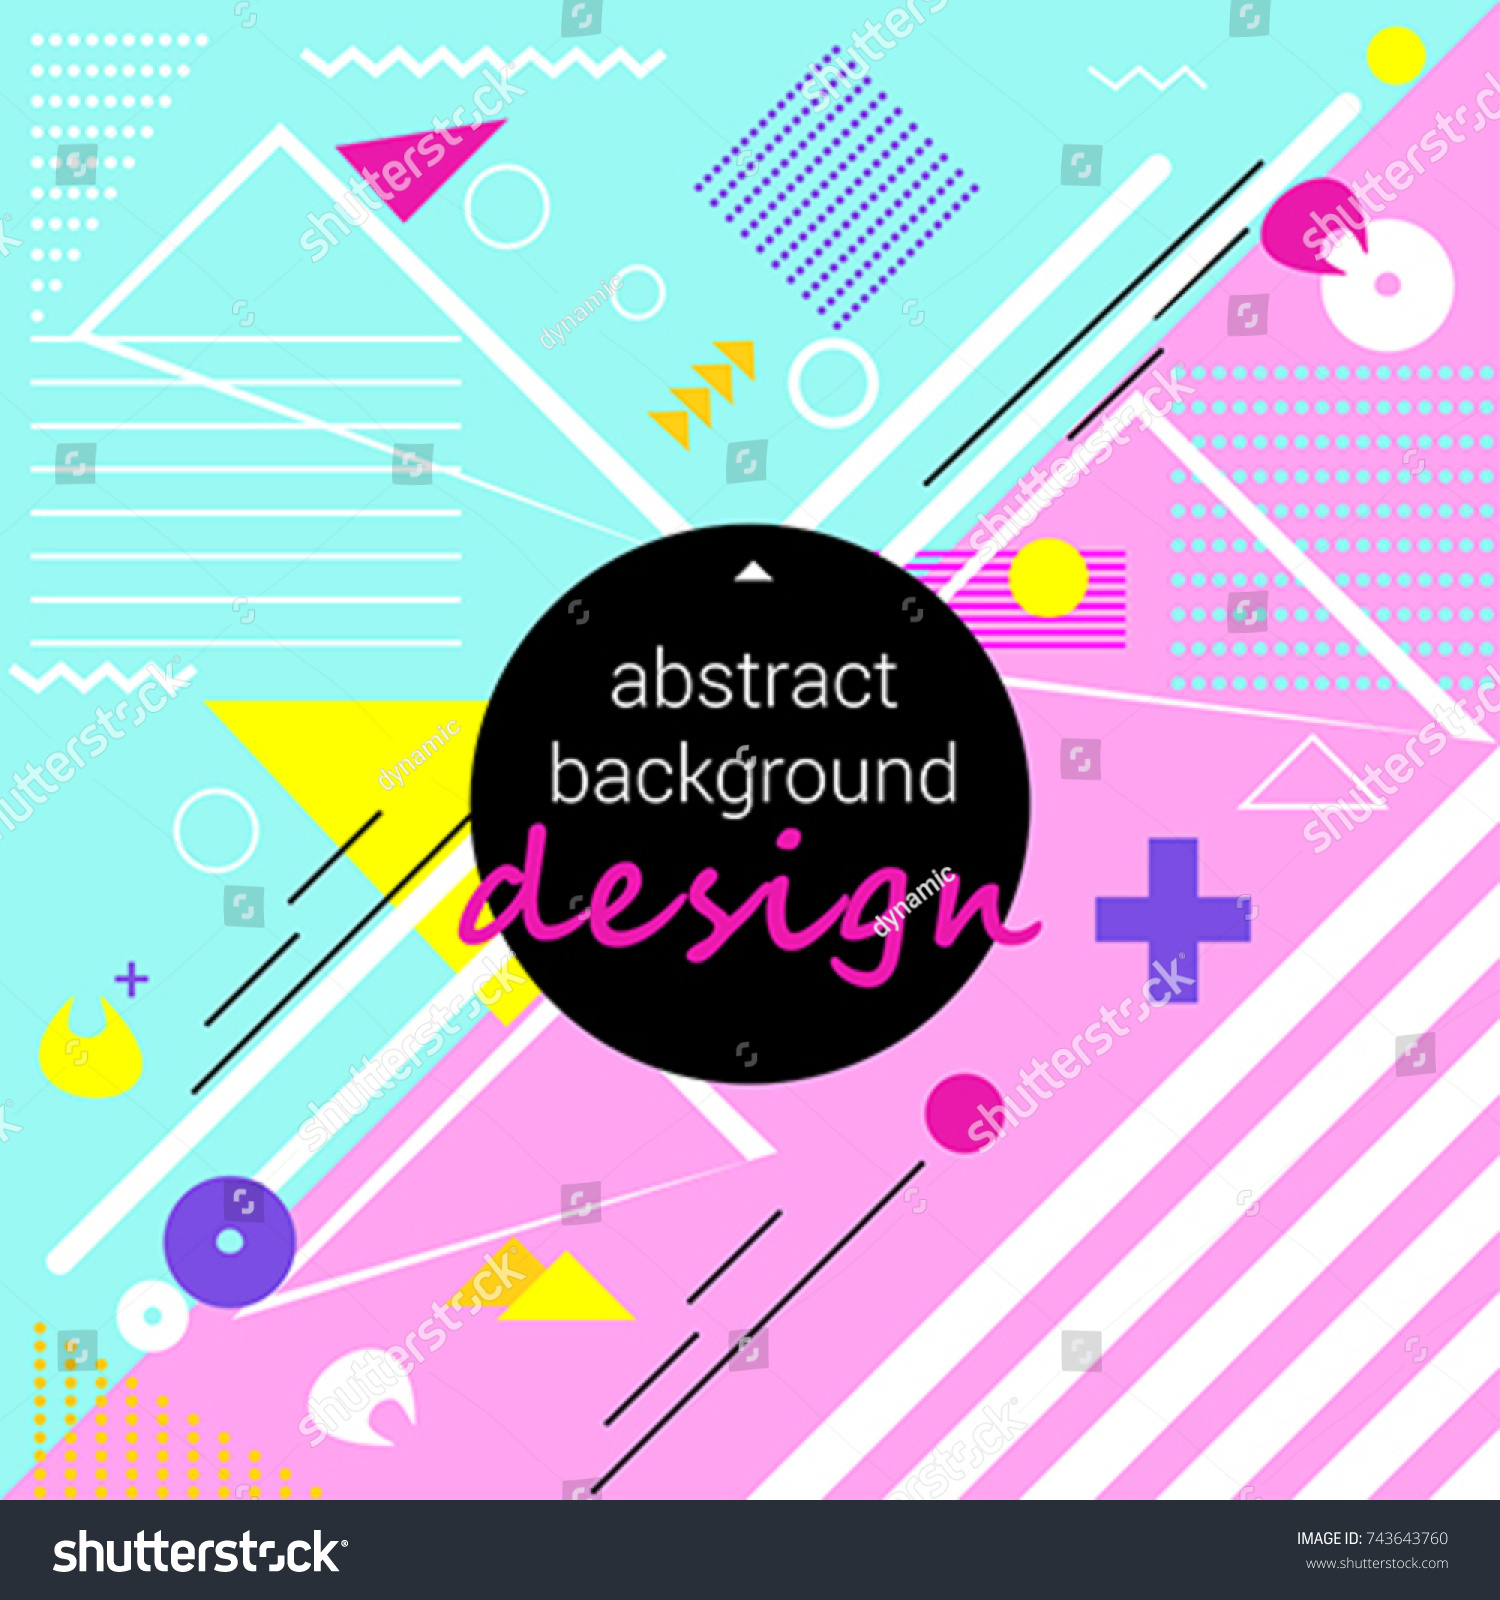 Abstract Background Design Geometric Shapes Such Stock Vector ...